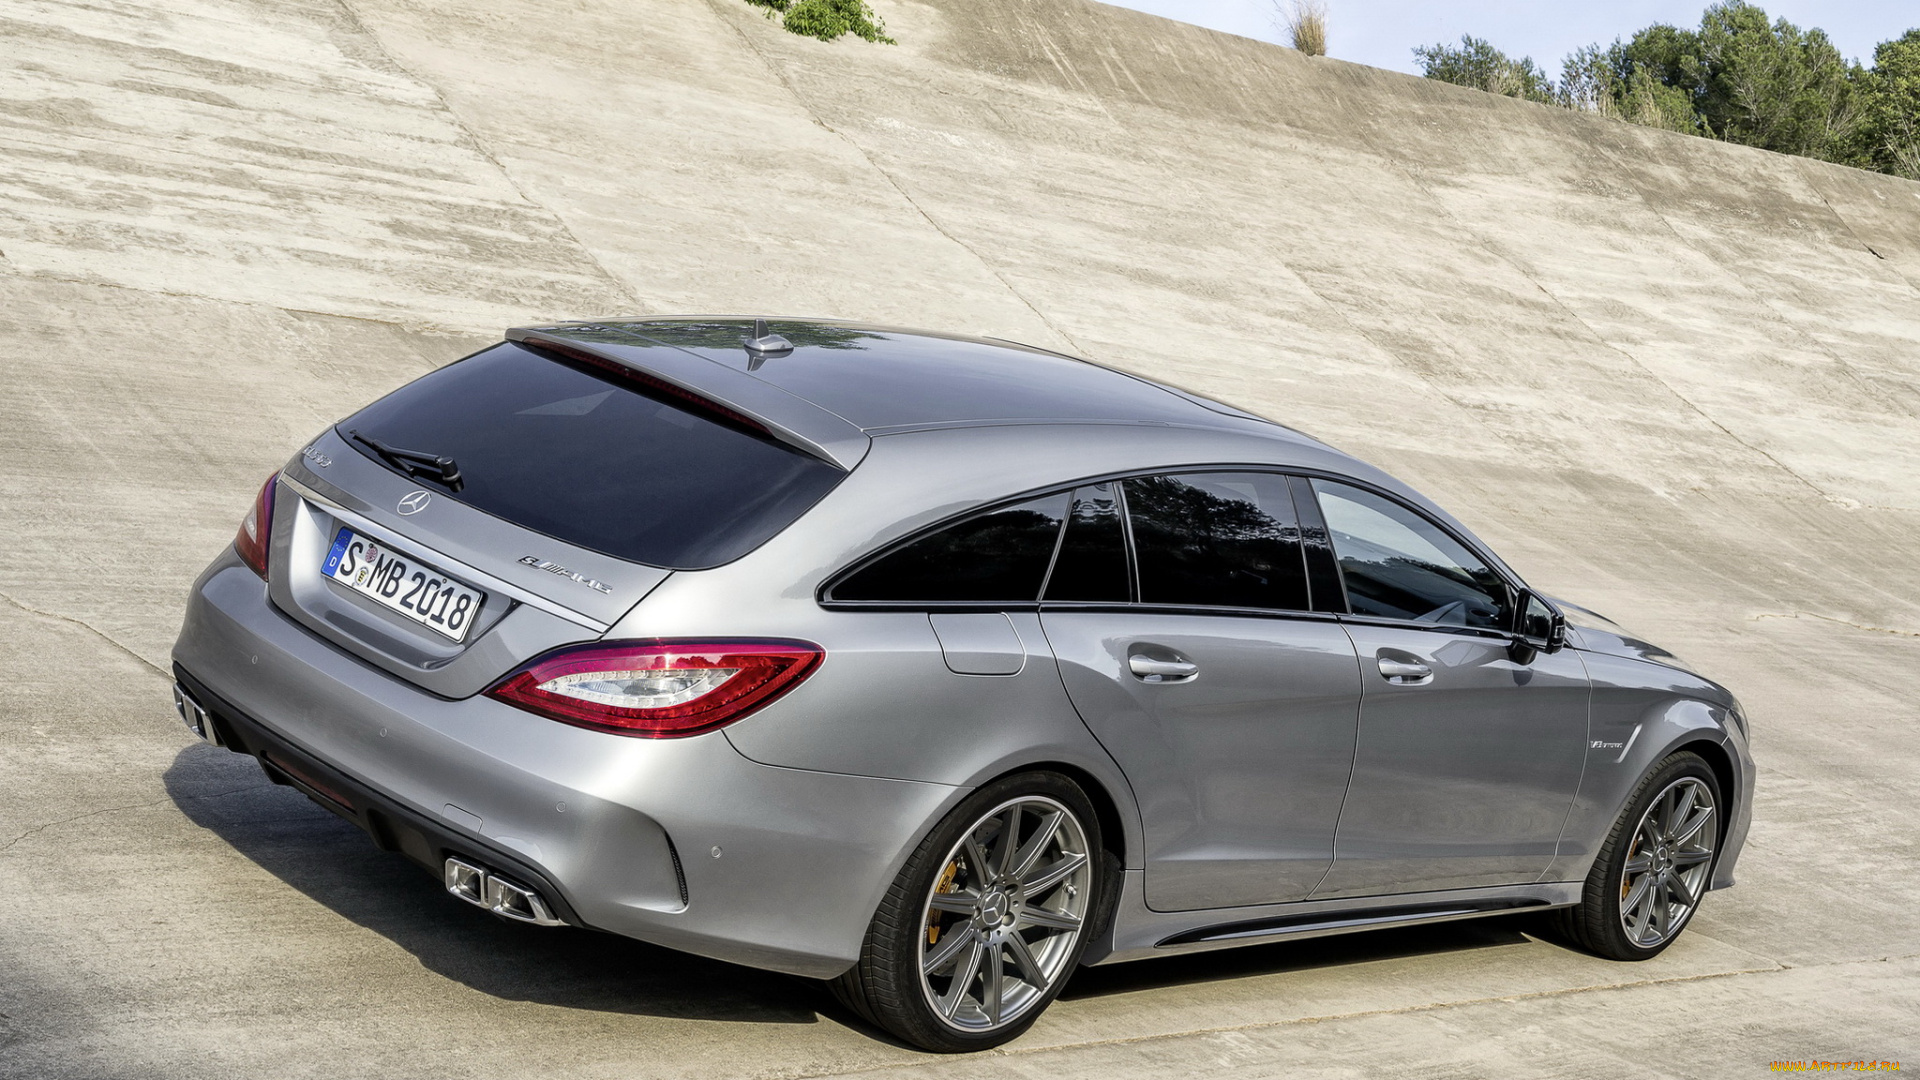 автомобили, mercedes-benz, cls, package, x218, 2014г, светлый, 400, shooting, sports, amg, brake